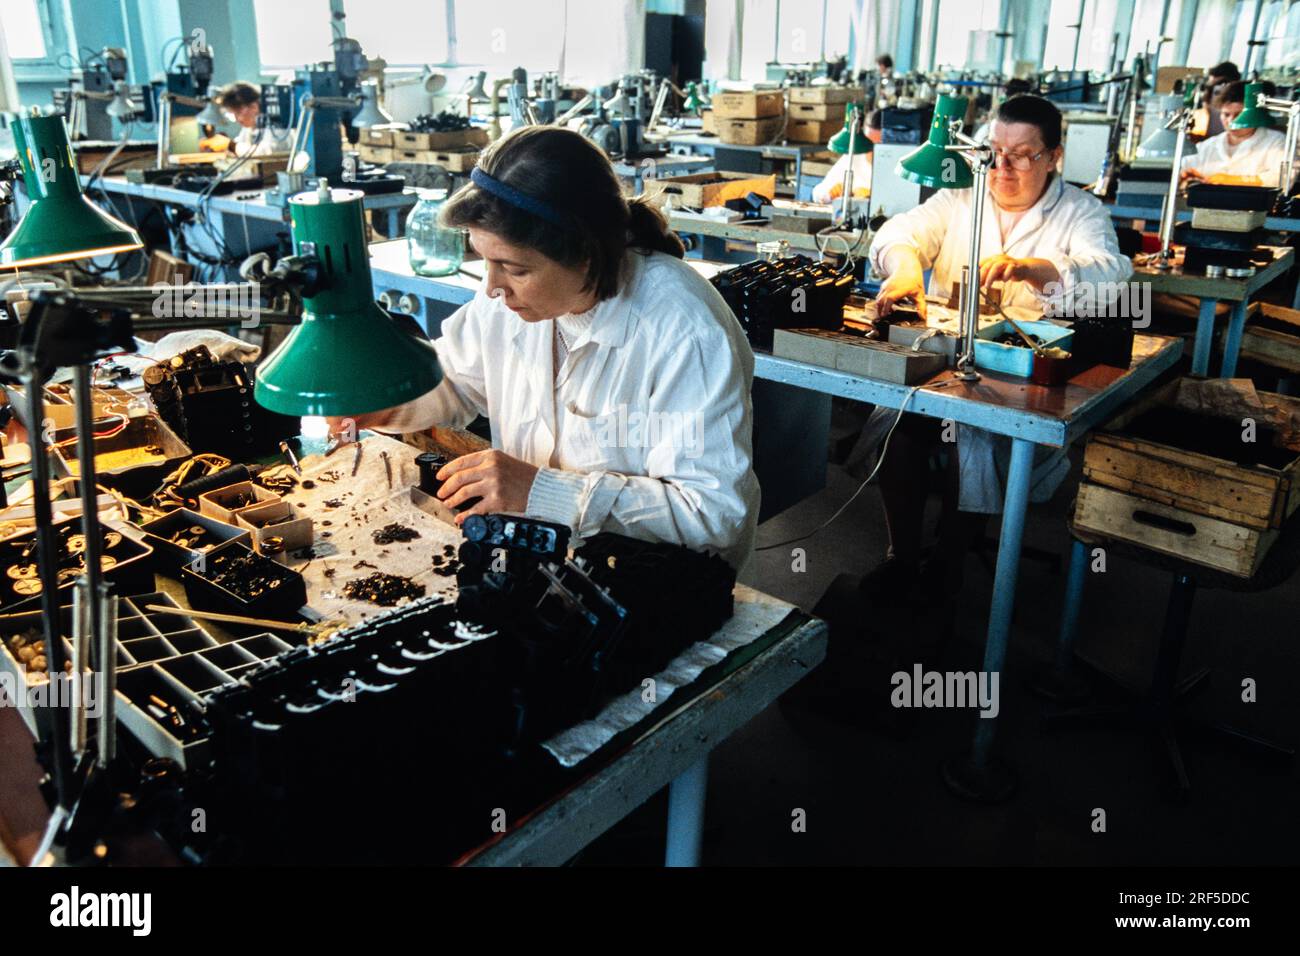 Technicians assemble tiny parts used in optical equipment by hand at the LOMO Optical Factory, December 10, 1994 in St. Petersburg, Russia. The Leningrad Optical Mechanical Association begun production in 1914 under the Soviet Union and was privatized in 1994 specializing in cameras, telescopes, microscopes and endoscopes. Stock Photo